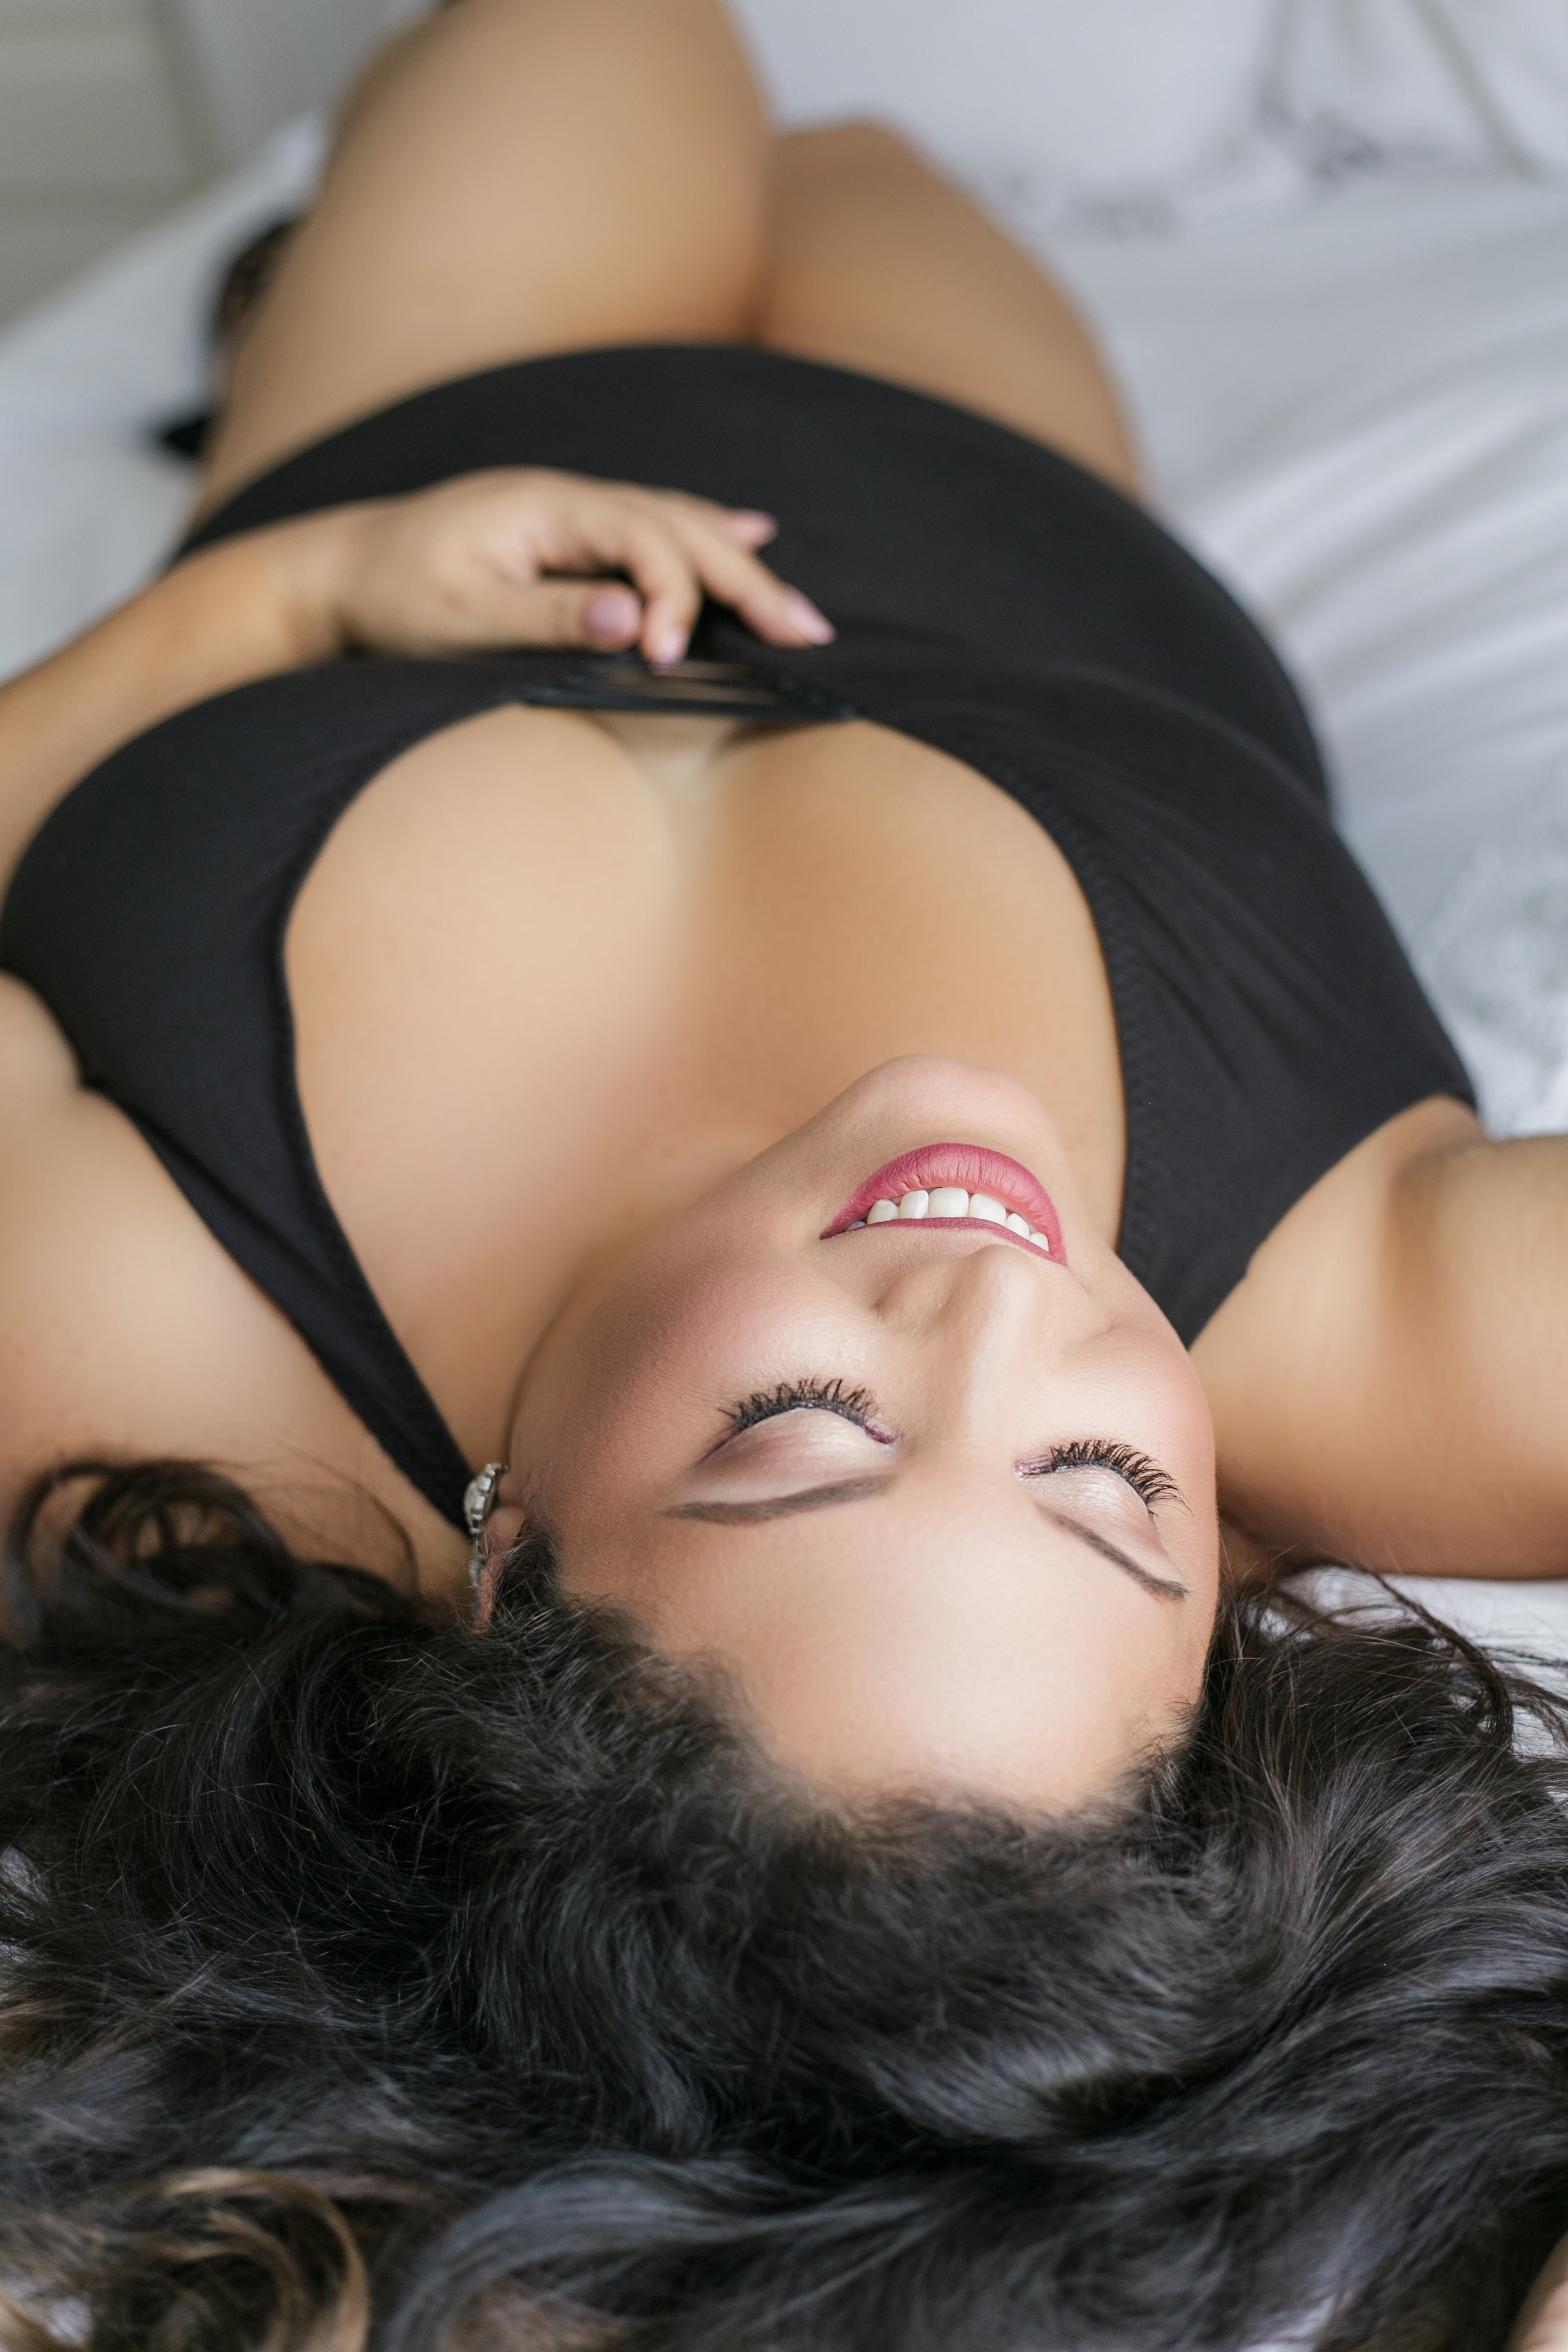 Model laying down on the bed wearing a black bodysuit.